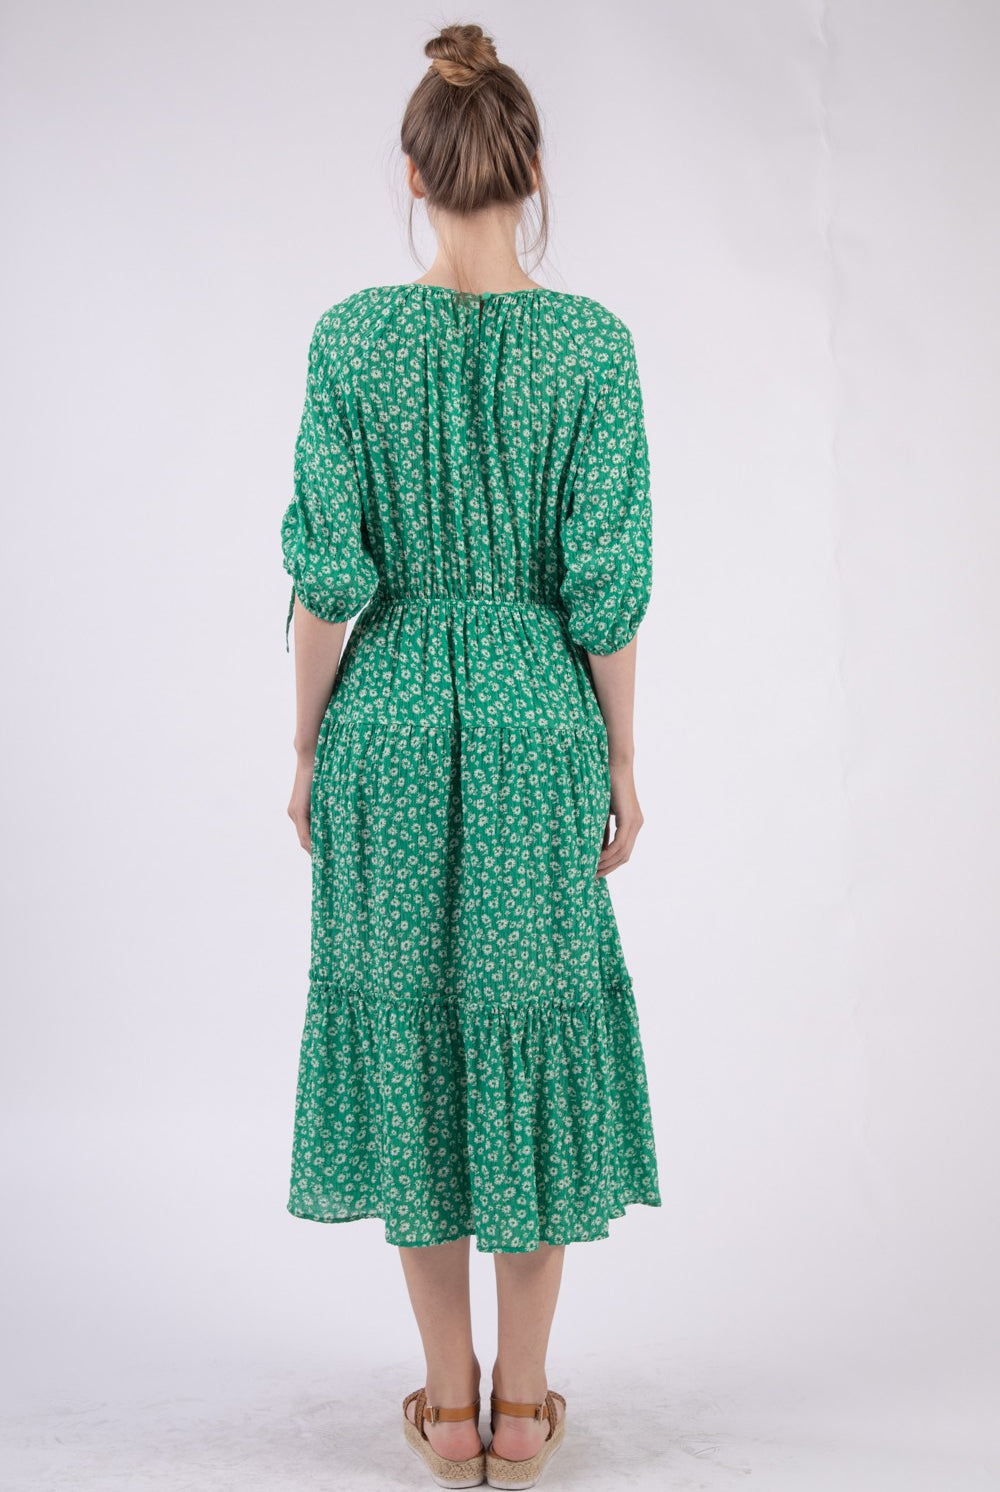 A poised woman in a fresh green midi dress adorned with a small white floral print. The dress features a cinched elastic waist, tie-up details at the three-quarter length sleeves, and a tiered skirt that adds movement. She pairs the look with natural brown strappy wedge sandals, perfect for a breezy day out.